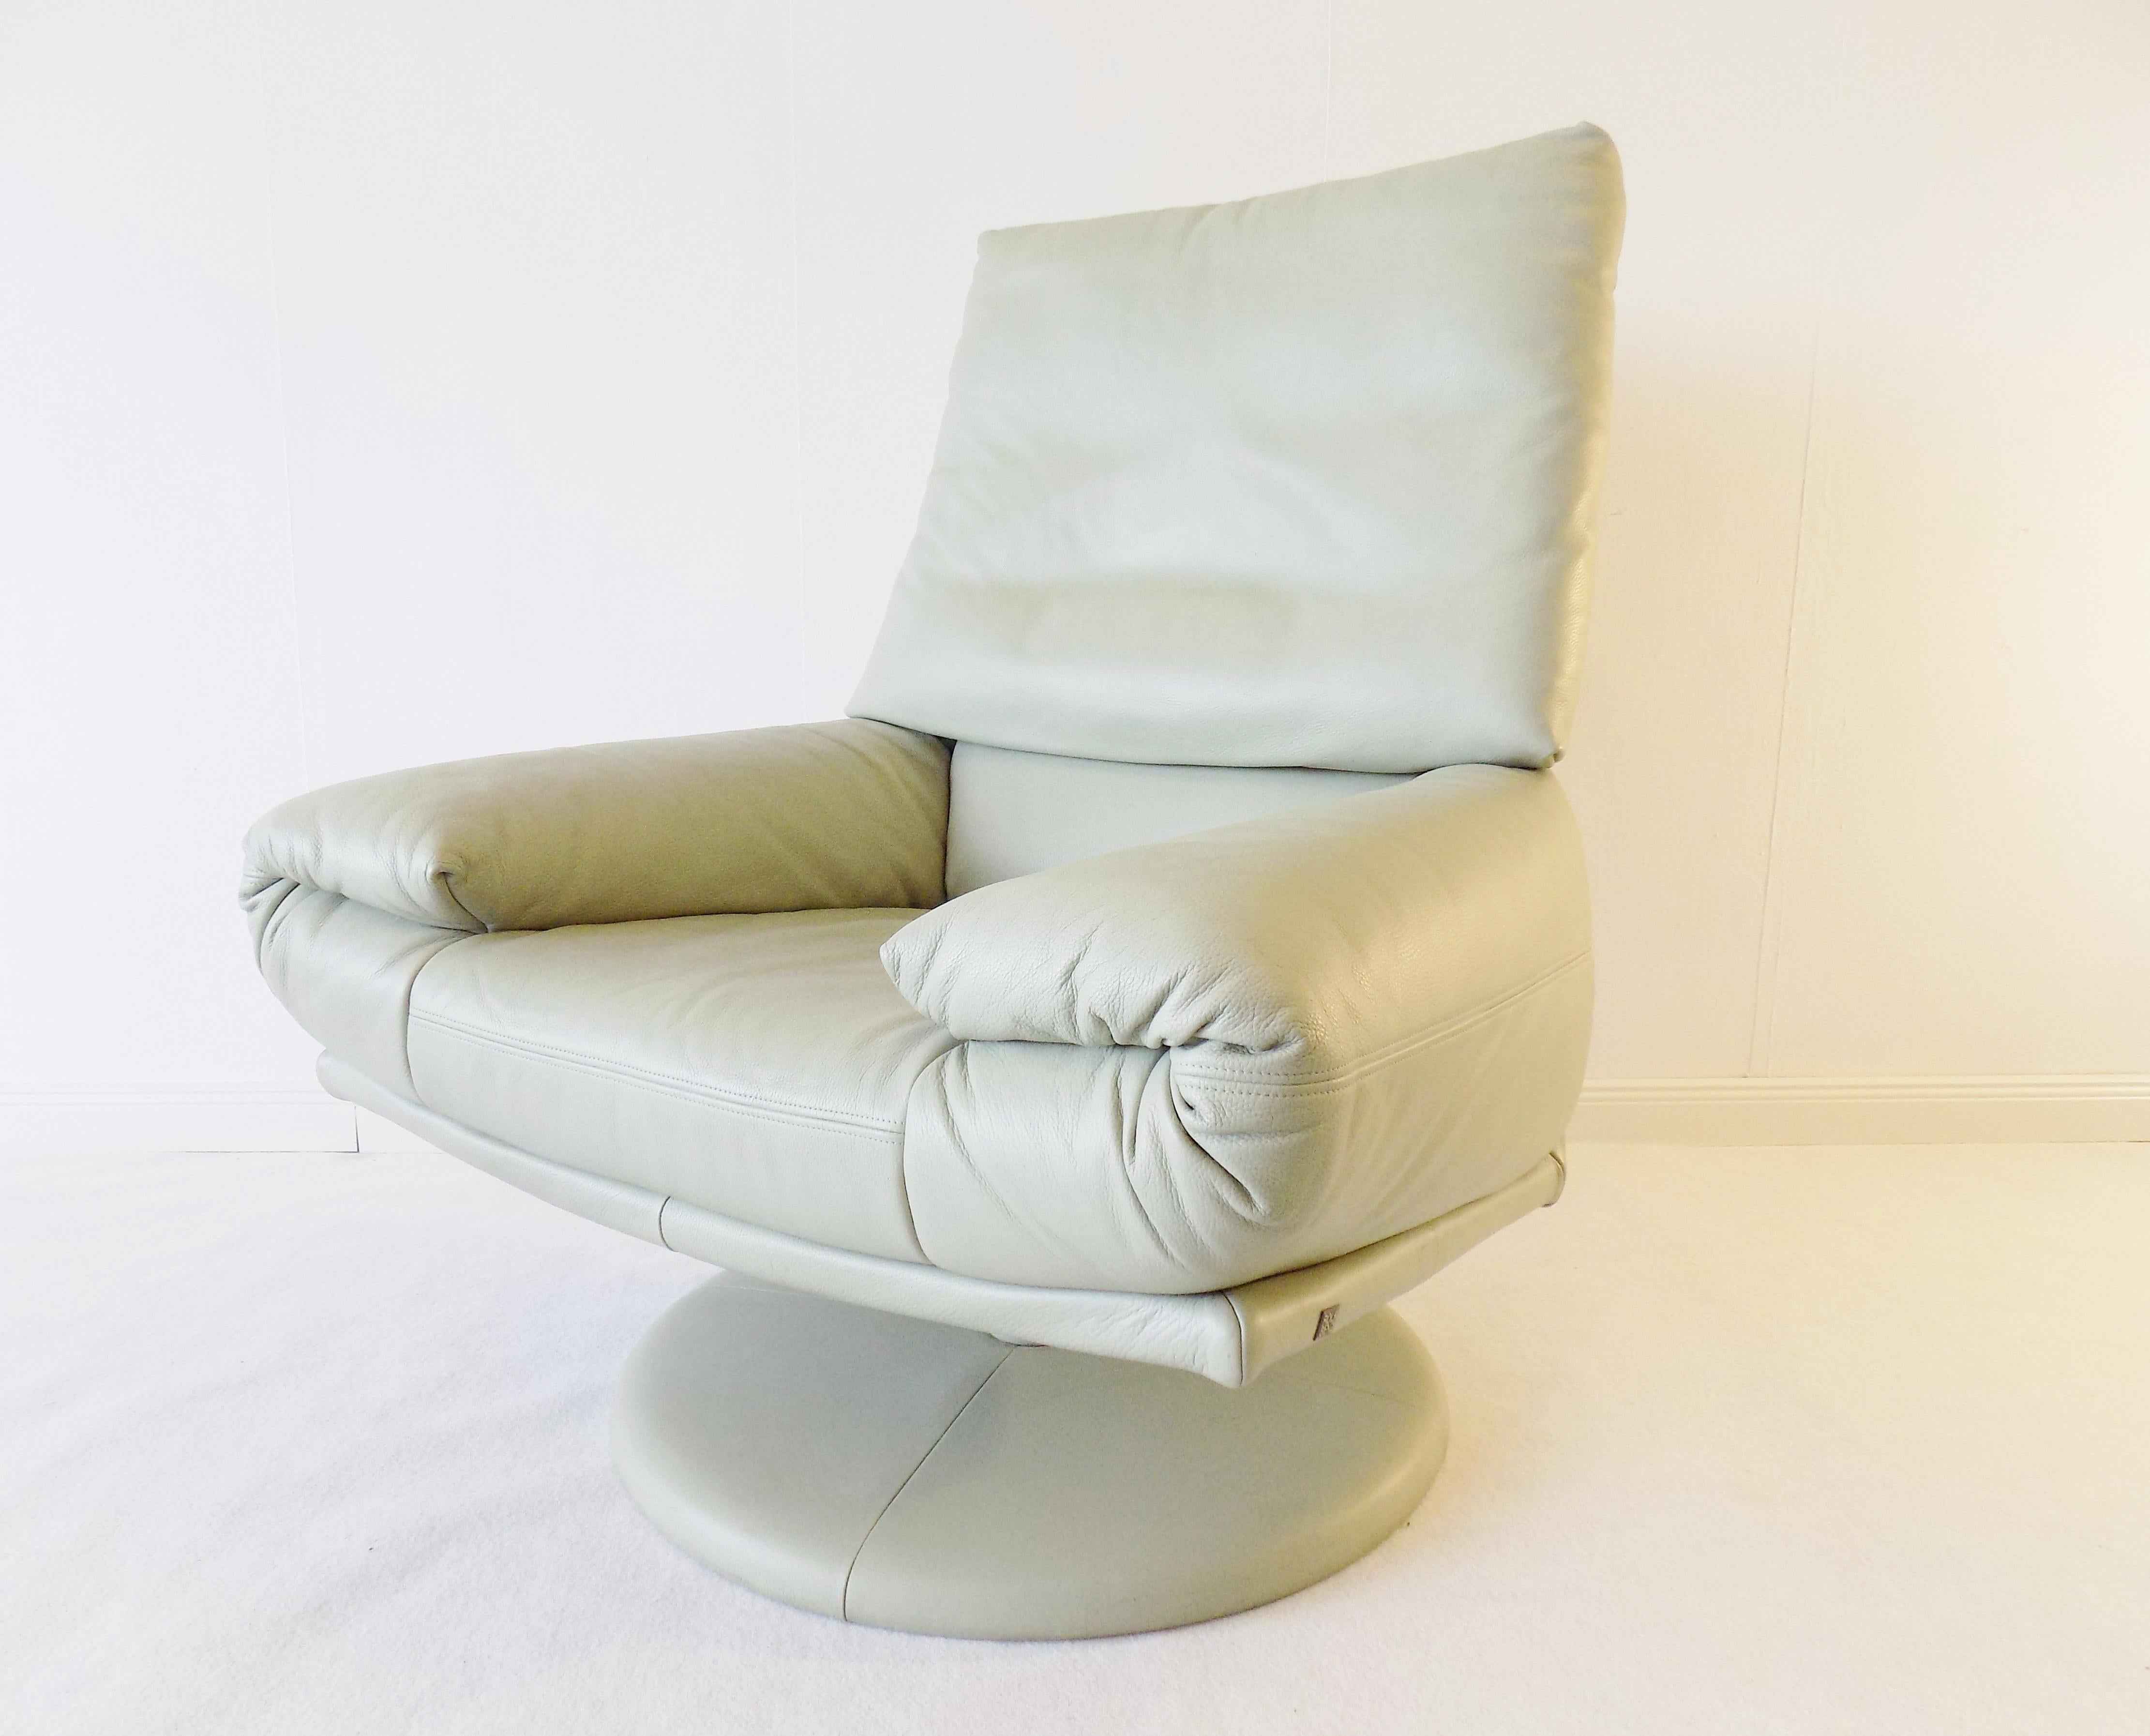 Lounge chair from Rolf Benz/bmp in a light mint colored leather. The leather in highest quality is, except from two small parts in the corners of the backrest, in an excellent condition. Also the in leather covered base is without tear and wear. The